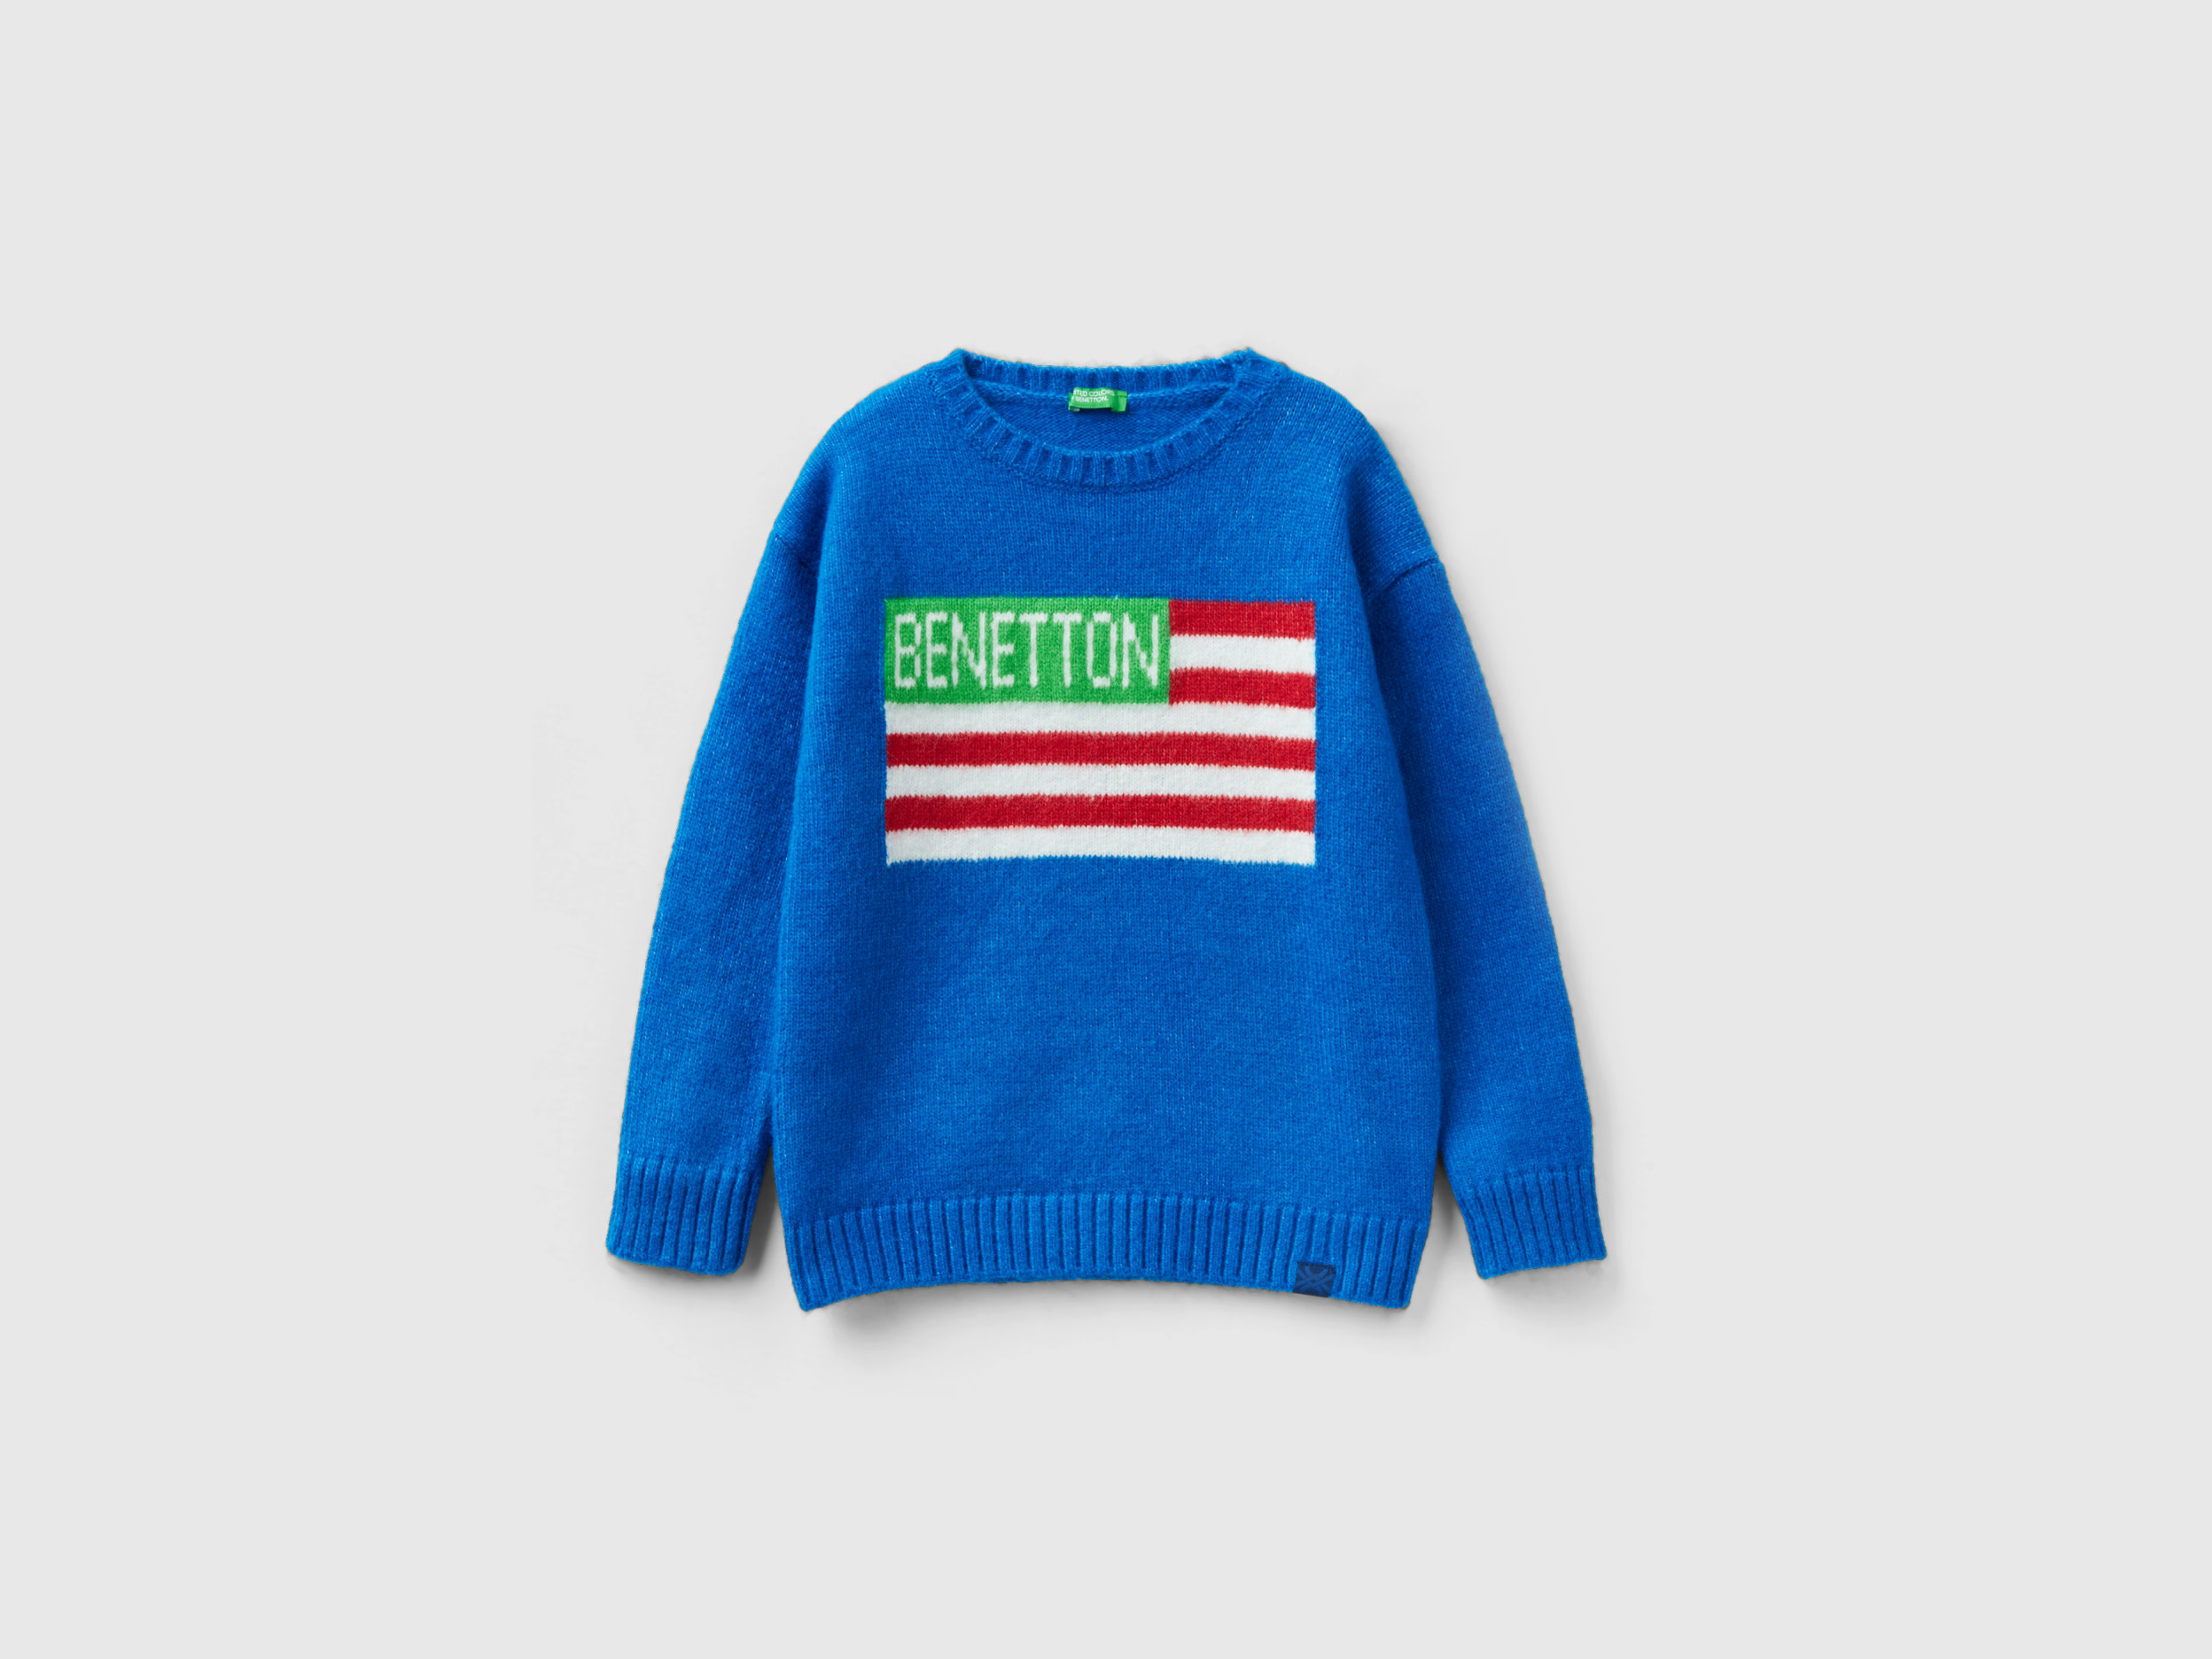 Benetton, Sweater With Flag Inlay, size 2XL, Bright Blue, Kids